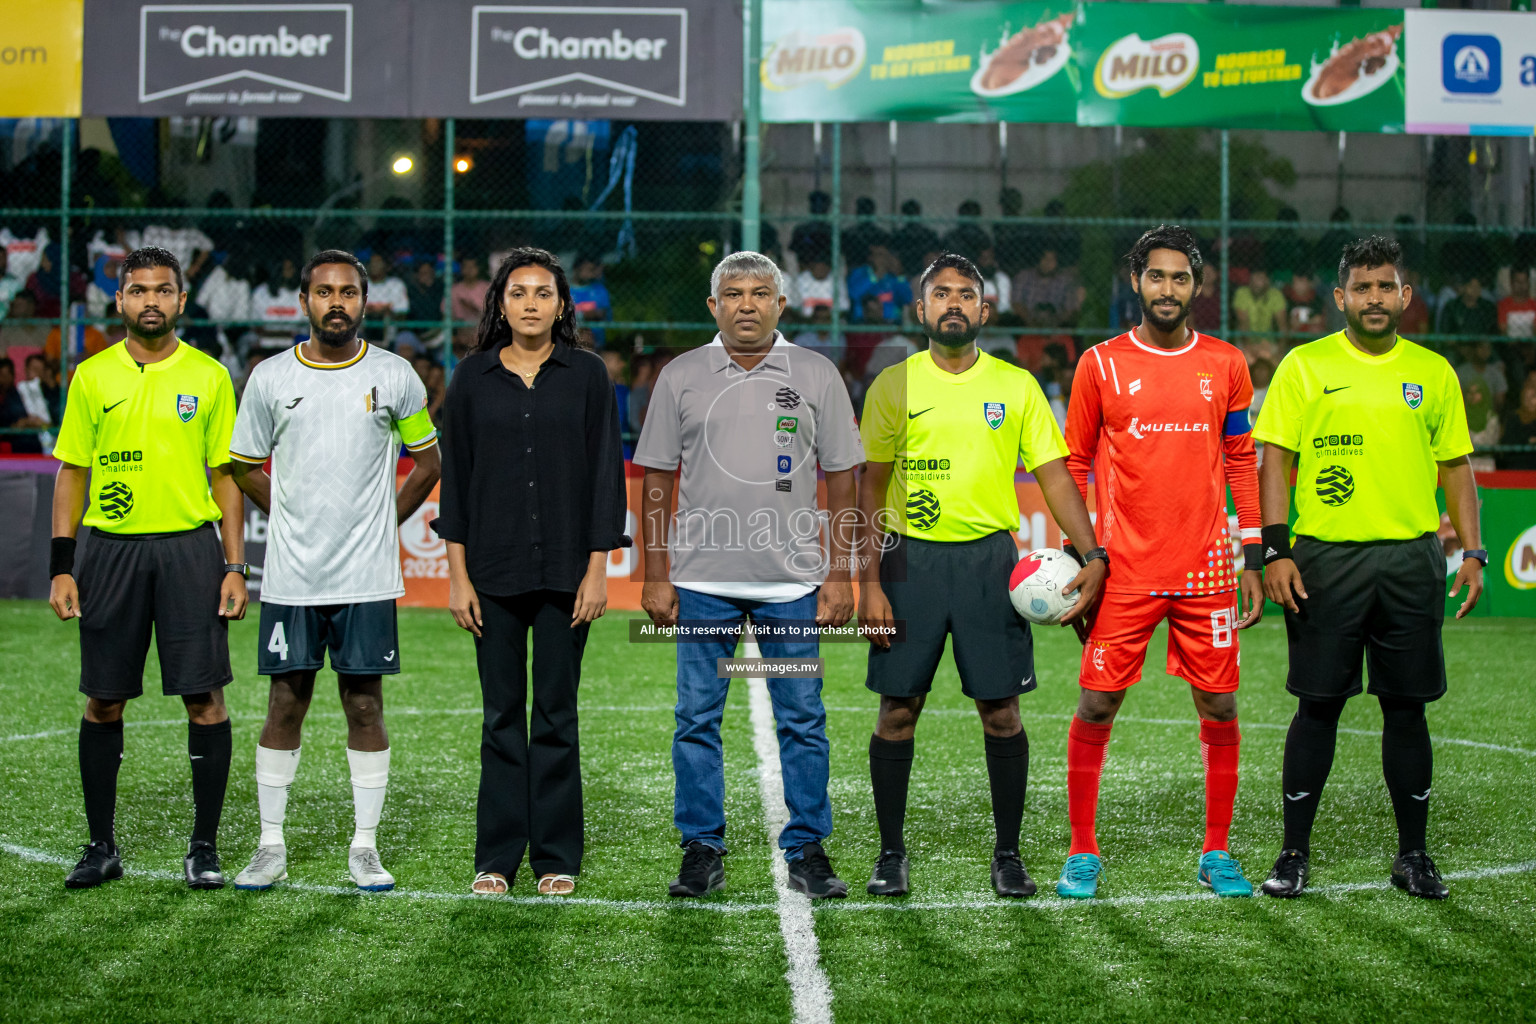 STO RC vs Club Airports in Round of 16 of Club Maldives Cup 2022 was held in Hulhumale', Maldives on Tuesday, 25th October 2022. Hassan Simah / images.mv